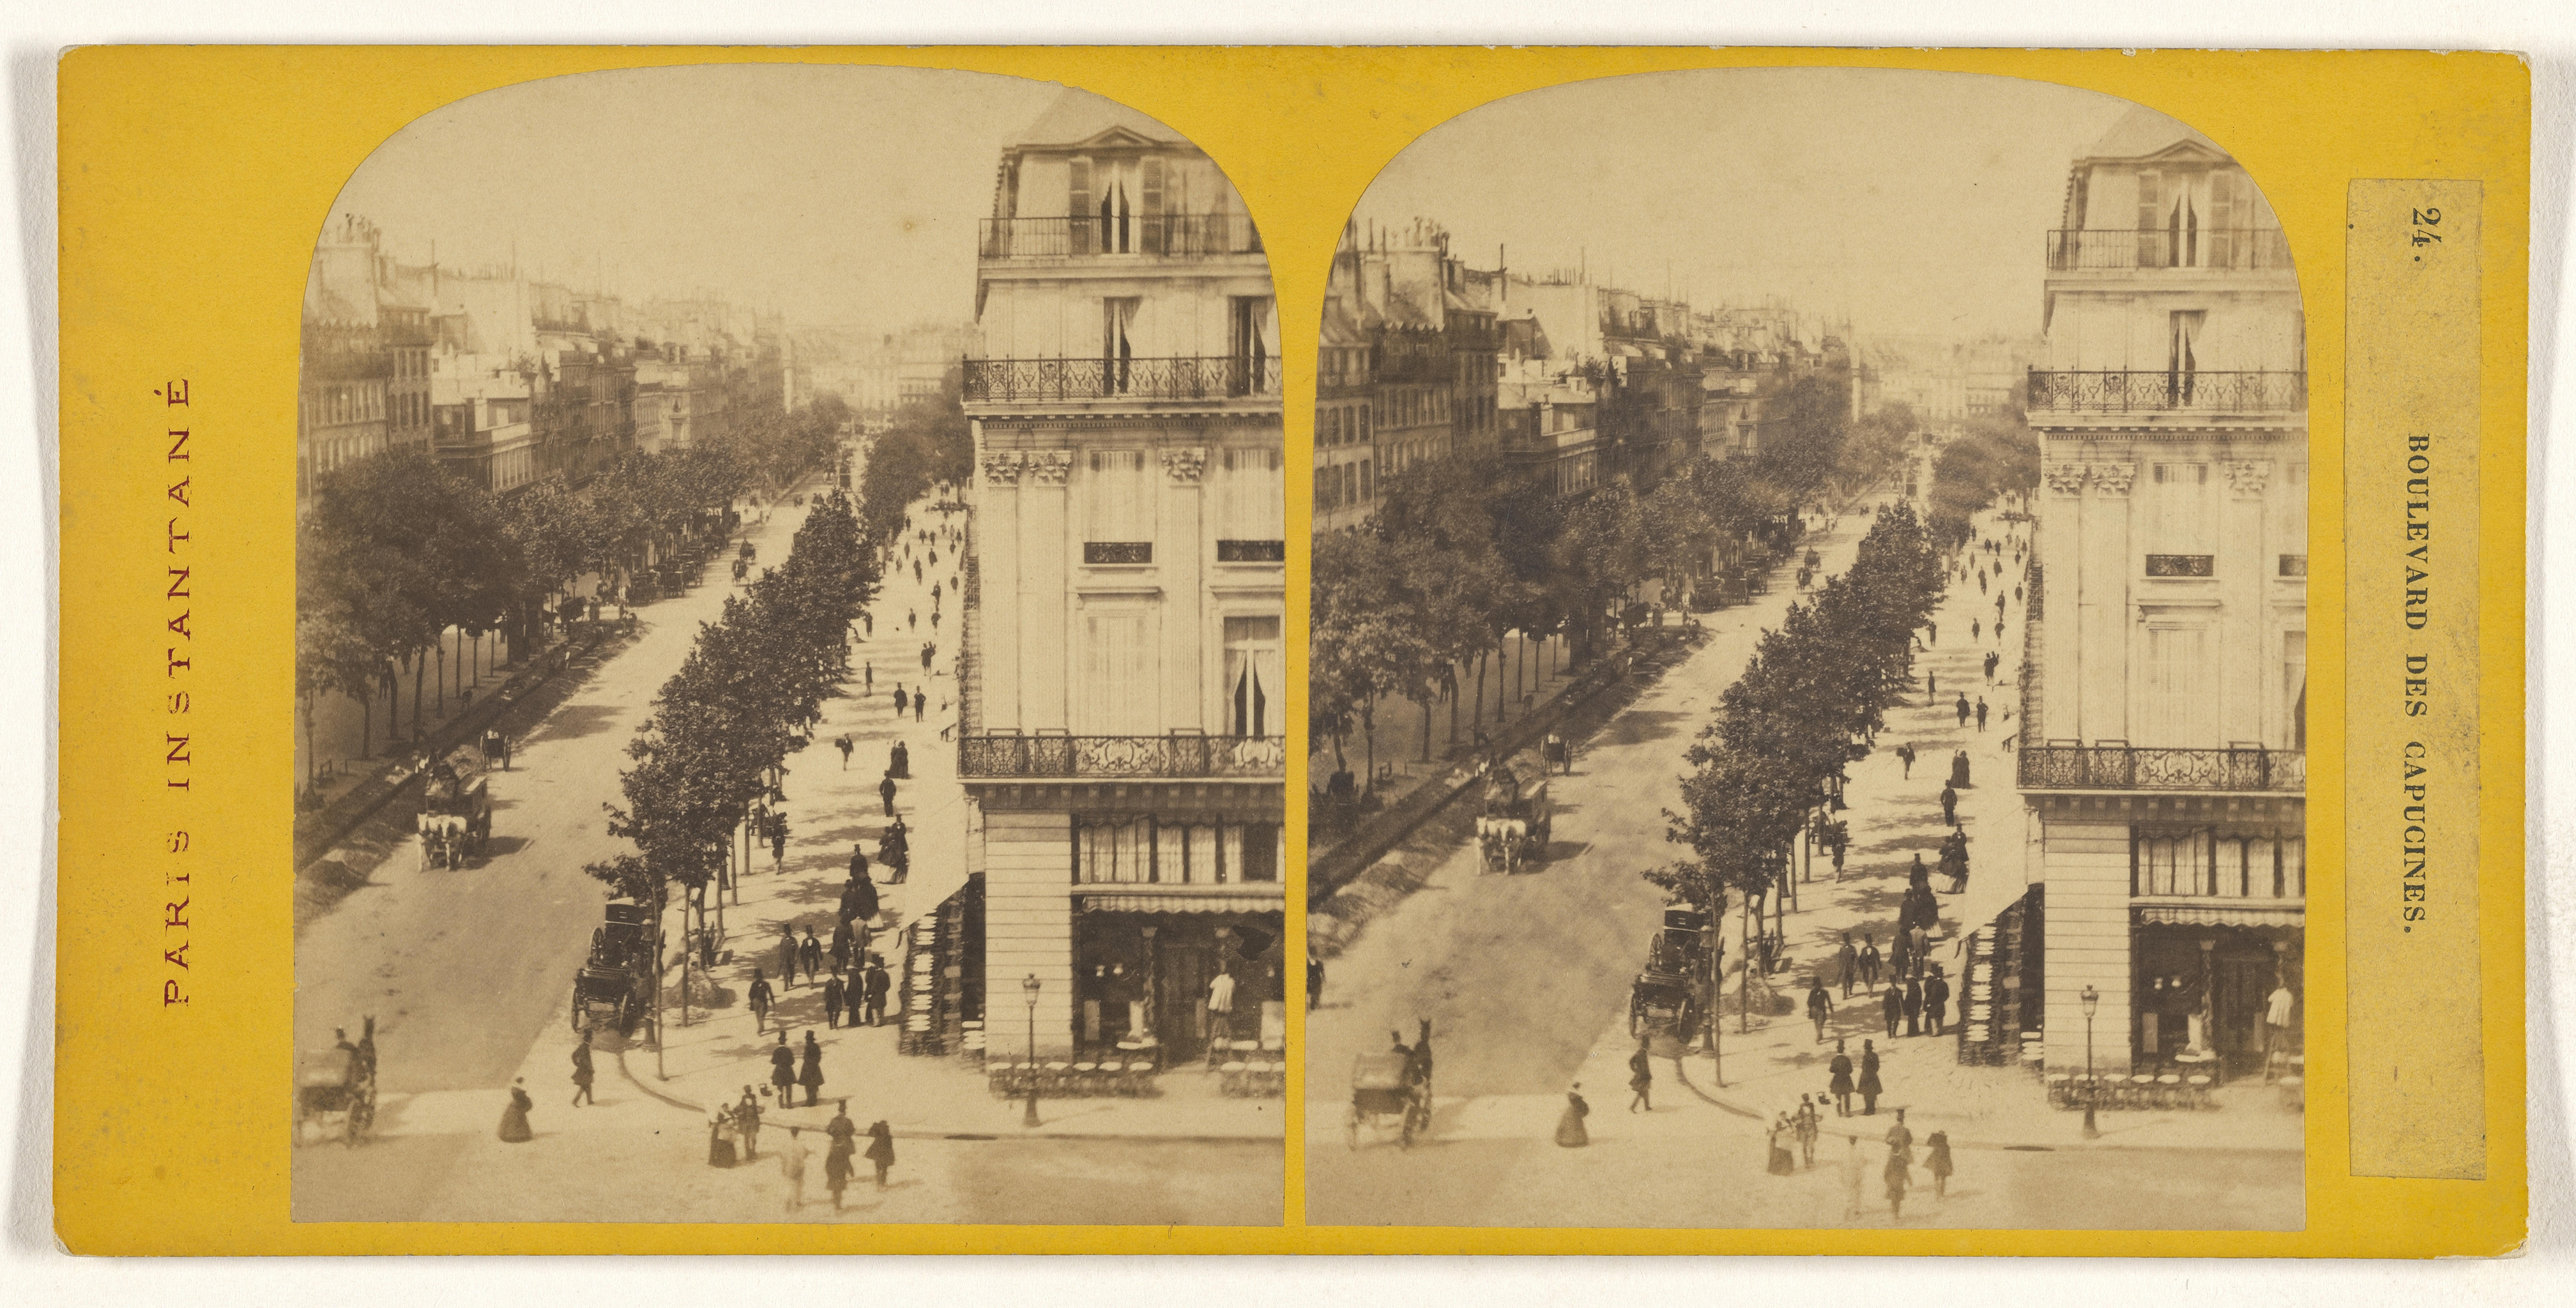 Two black and white photographs side to side in a yellow frame. The images depict a street aligned with trees and a row of buildings.